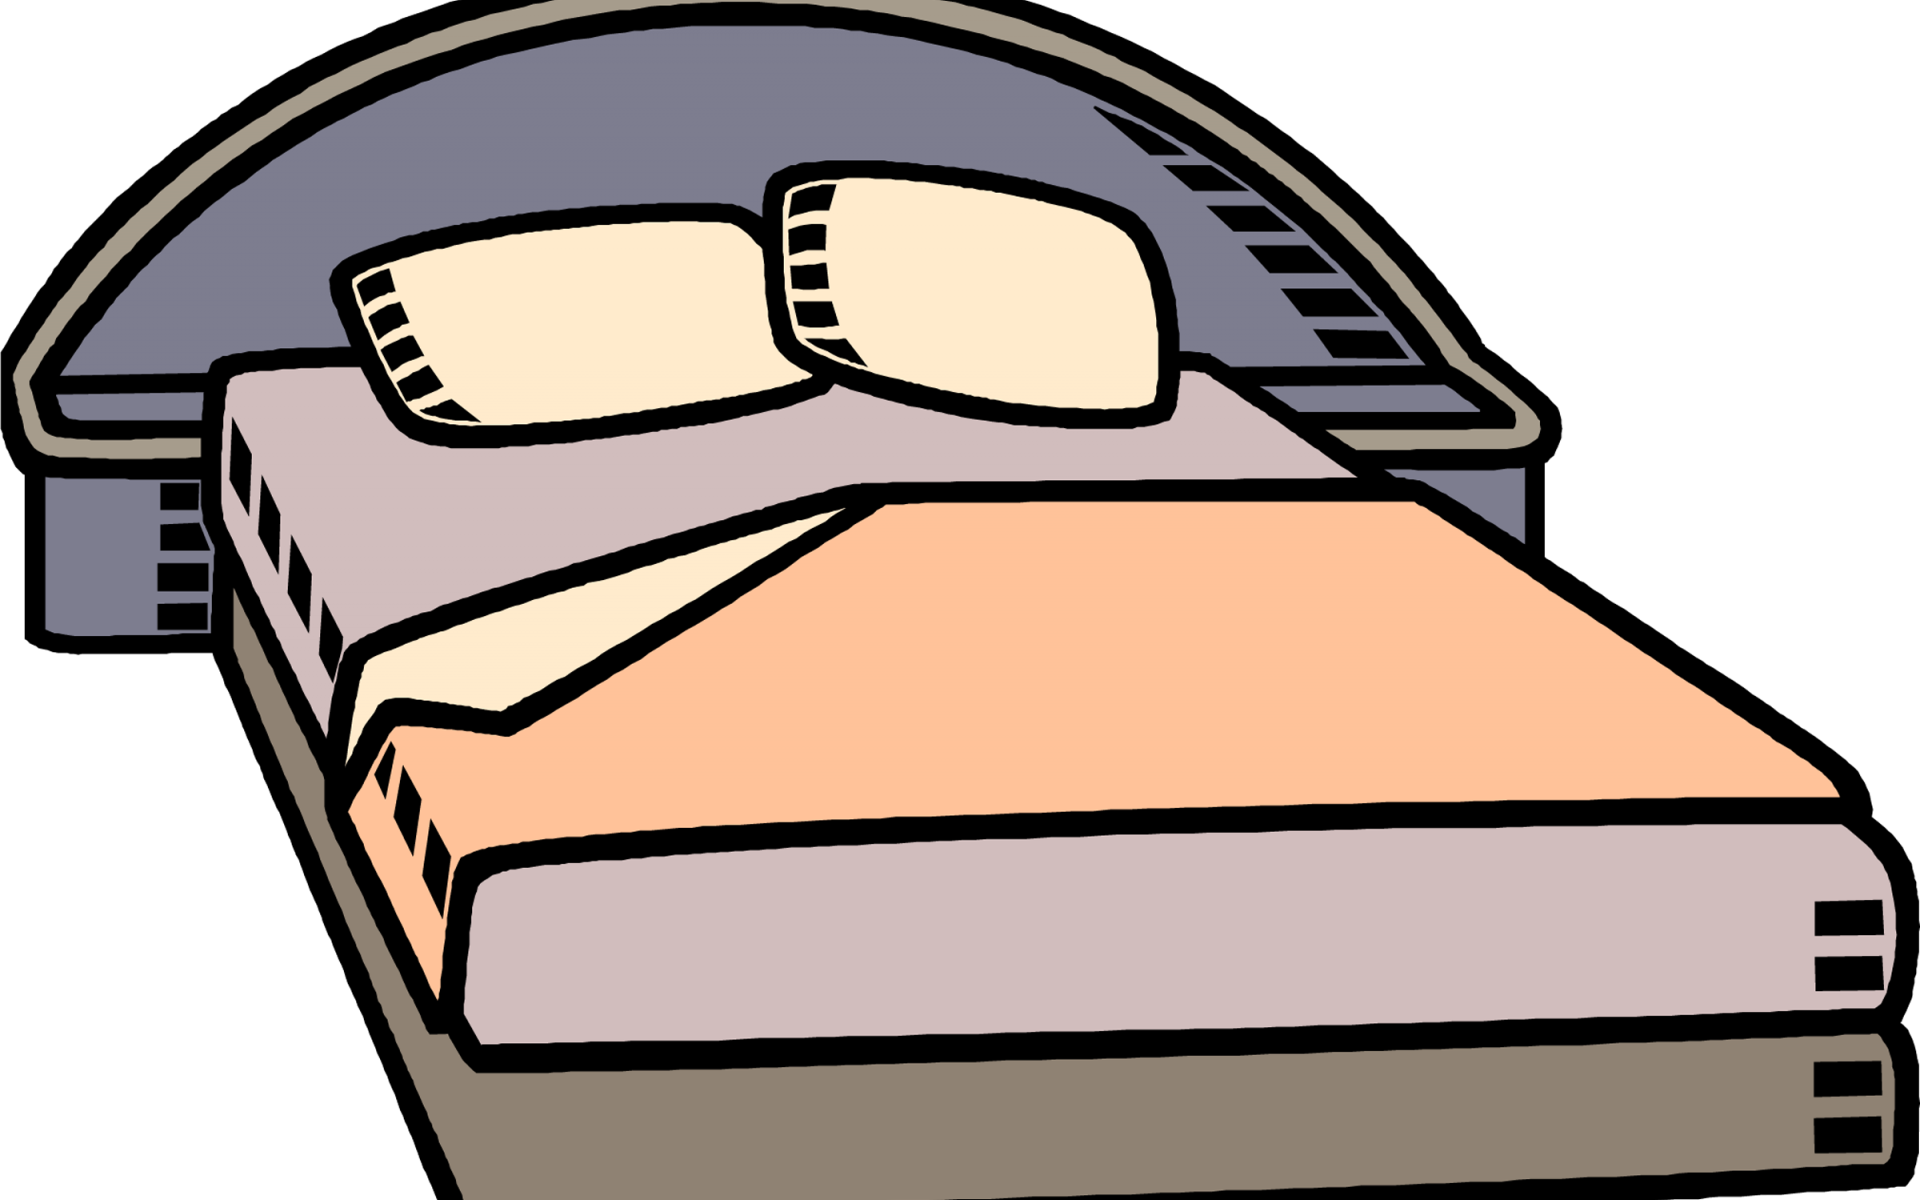 Make Bed Clipart - Bed Cartoon Images Transparent (1920x1200)